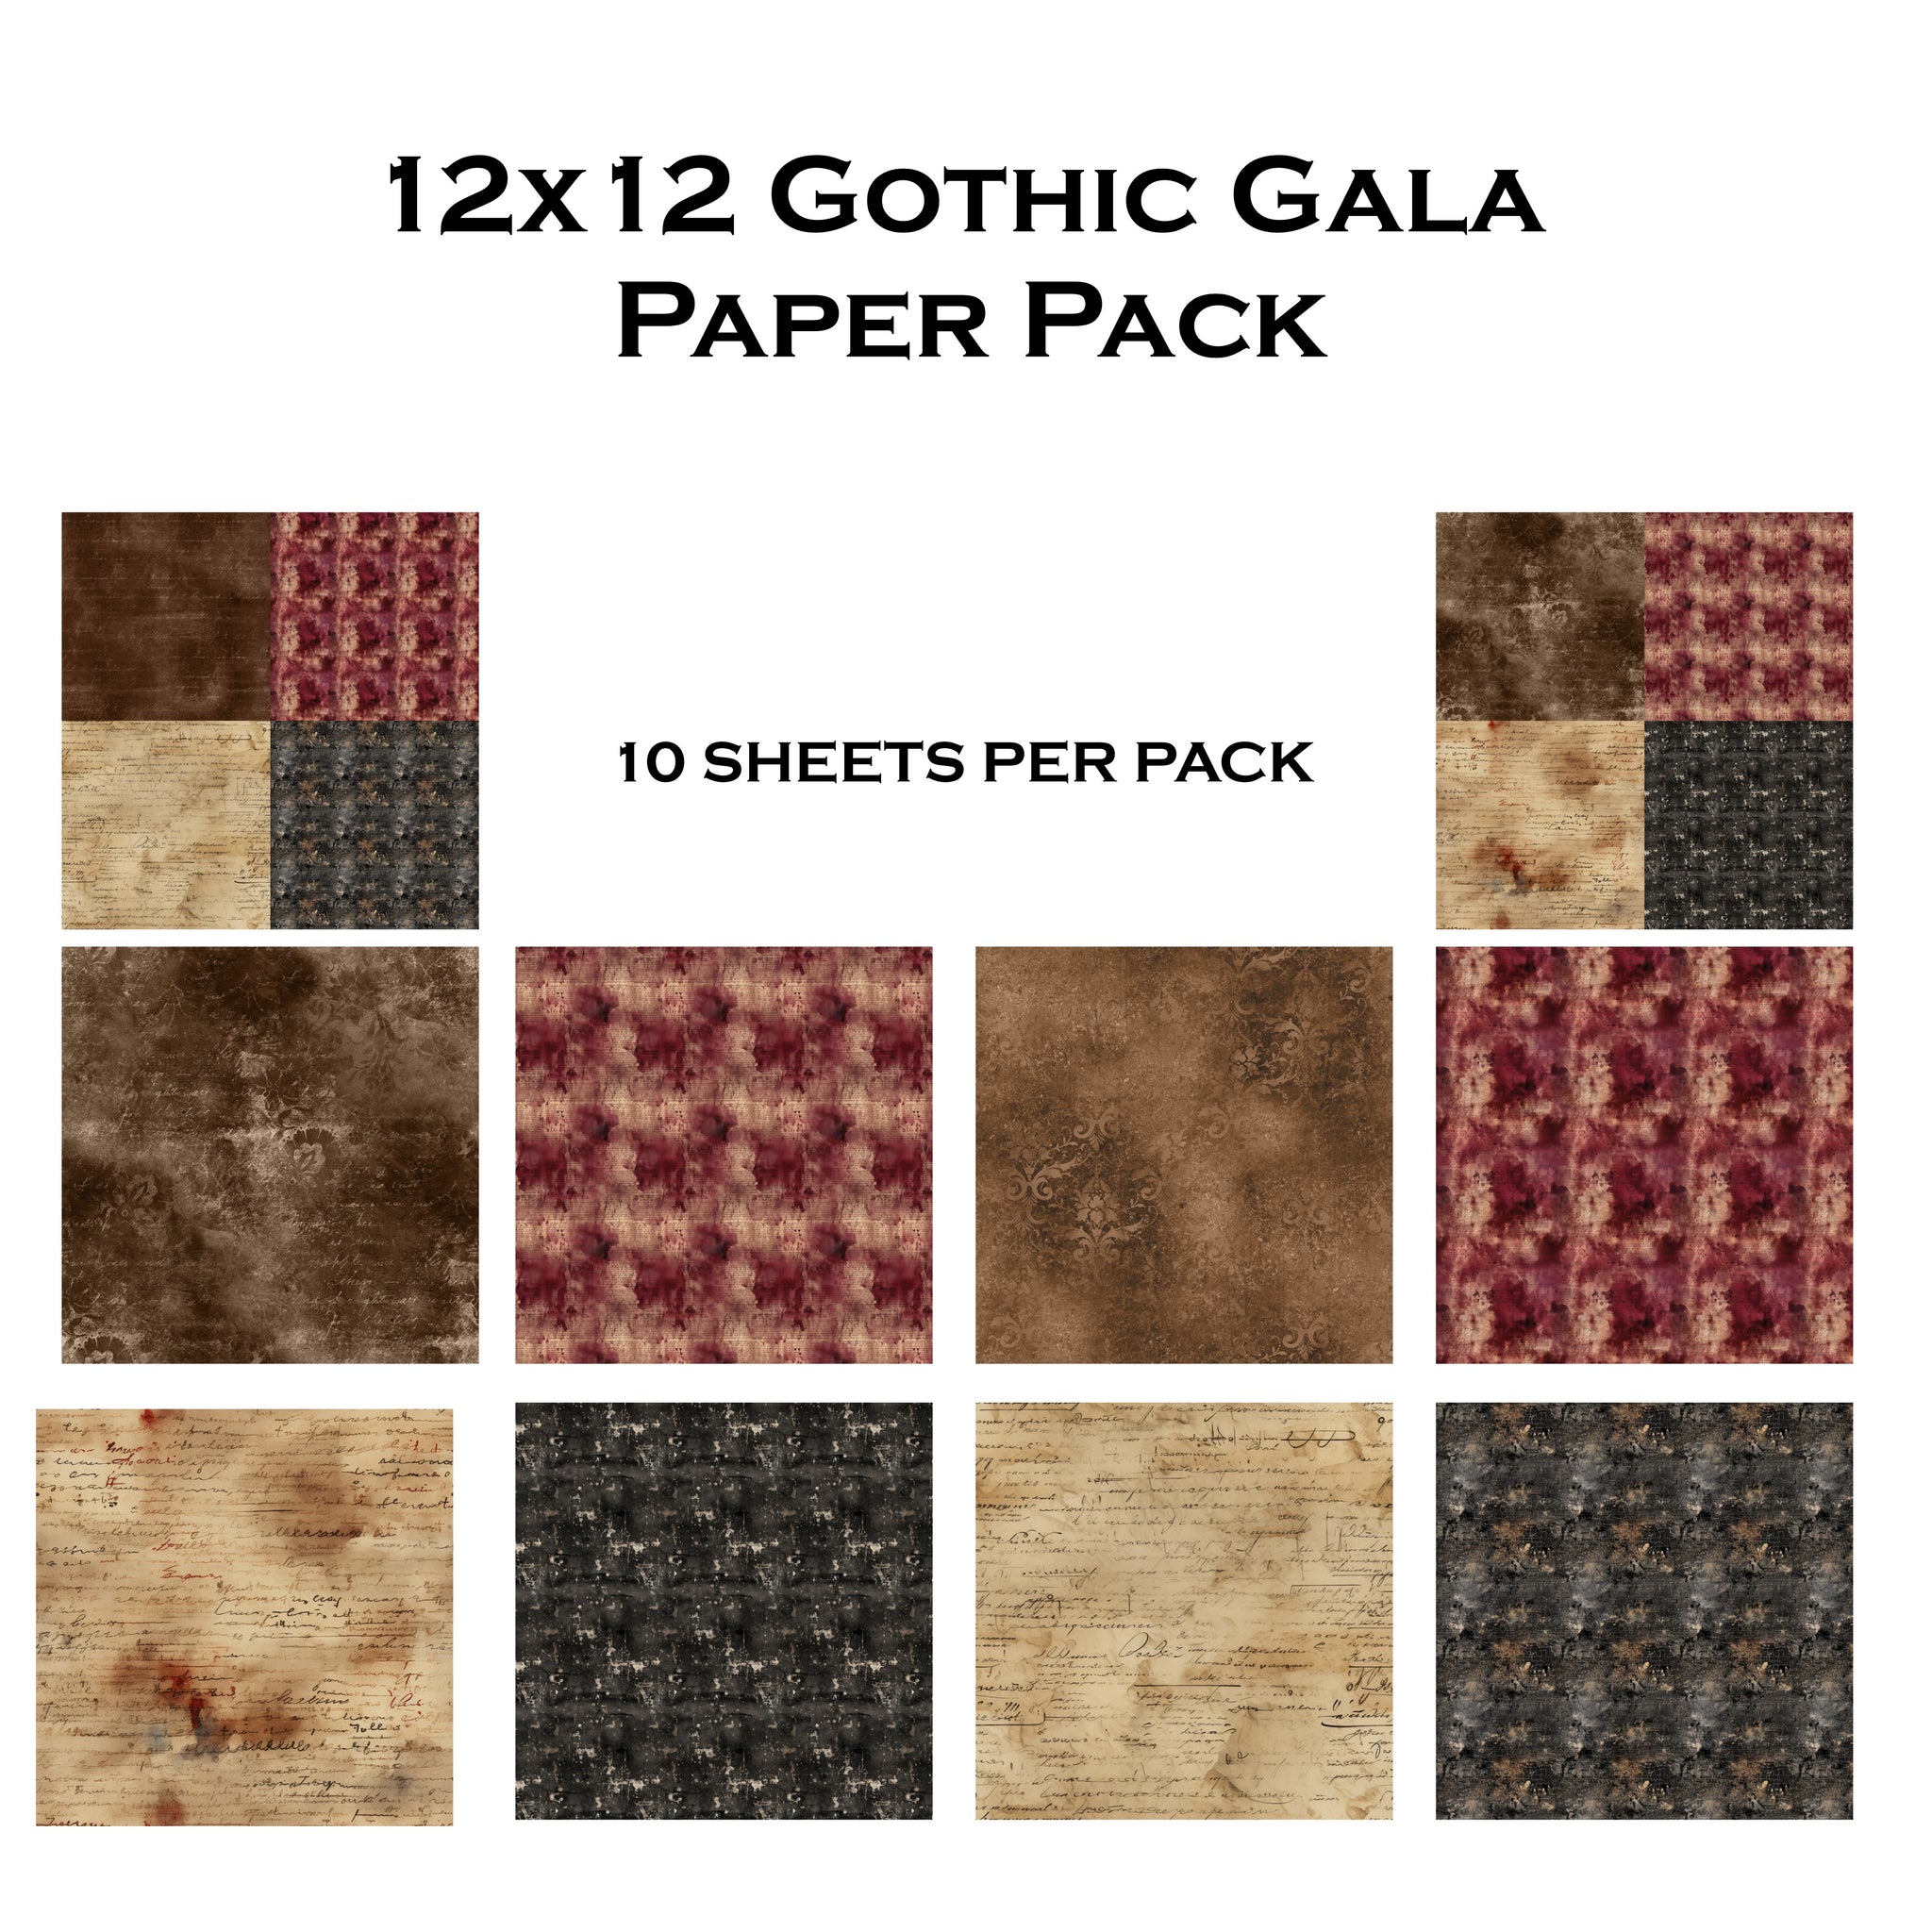 Gothic Gala 12x12 Paper Pack